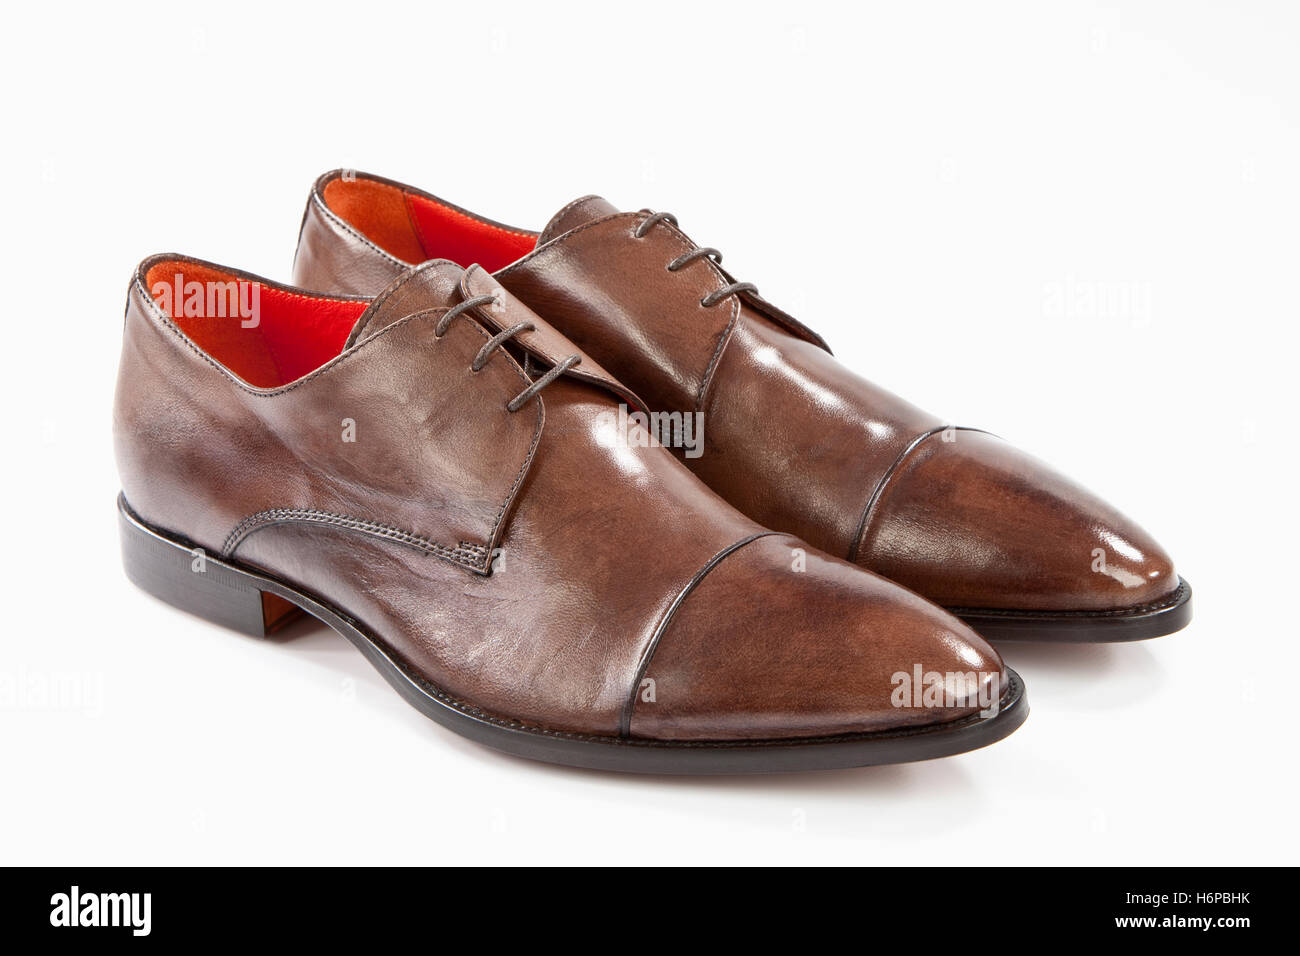 mens leather shoes Stock Photo